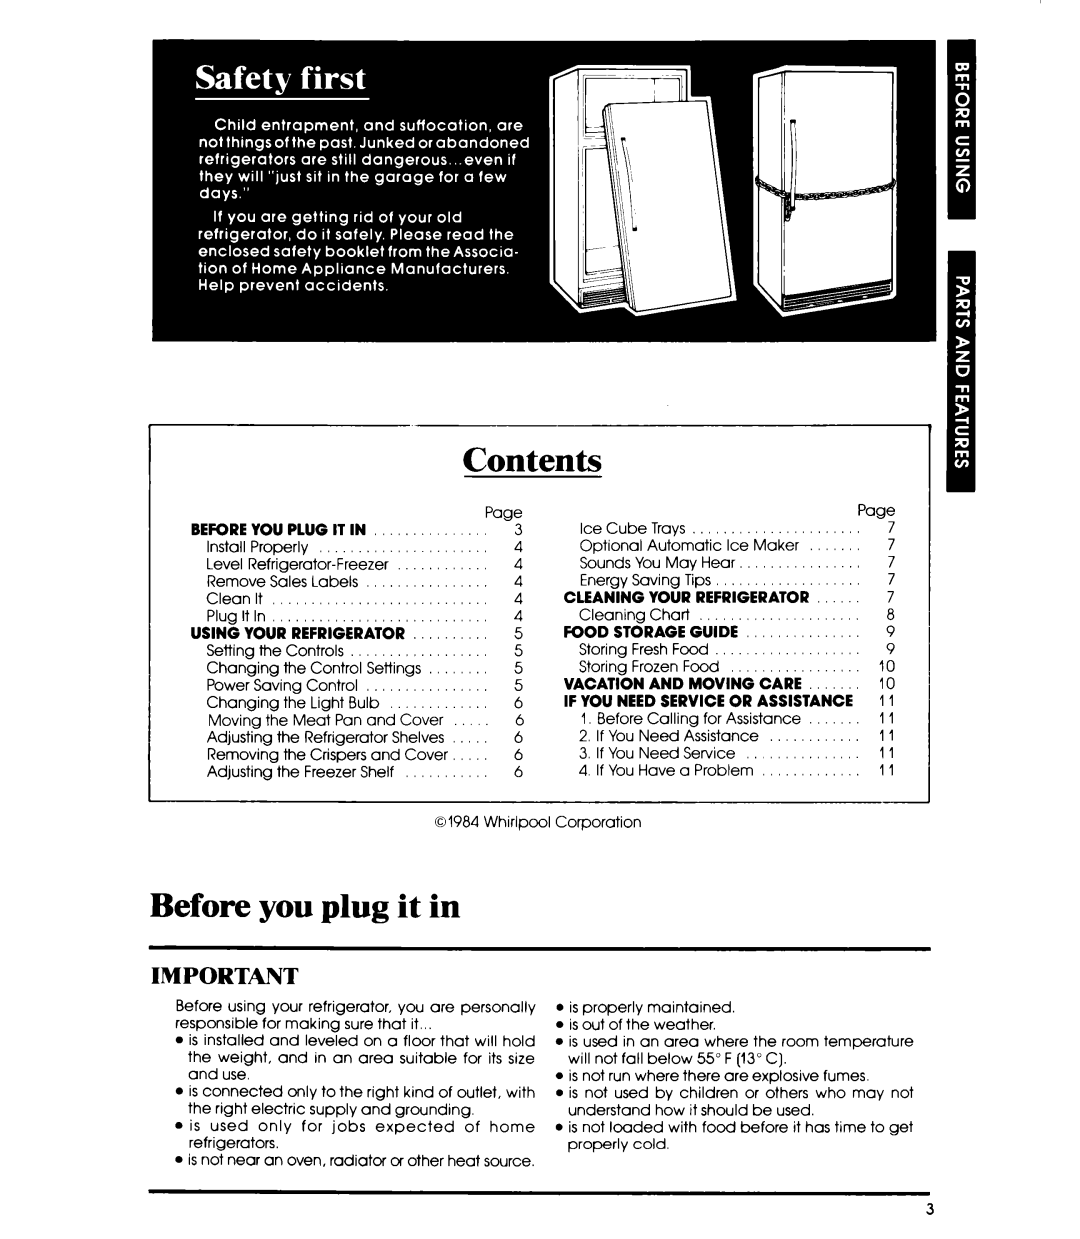 Whirlpool ETl8TK manual Contents, Before you plug it in, Beforeyou Plug It In, Using Your Refrigerator, Kod Storage Guide 